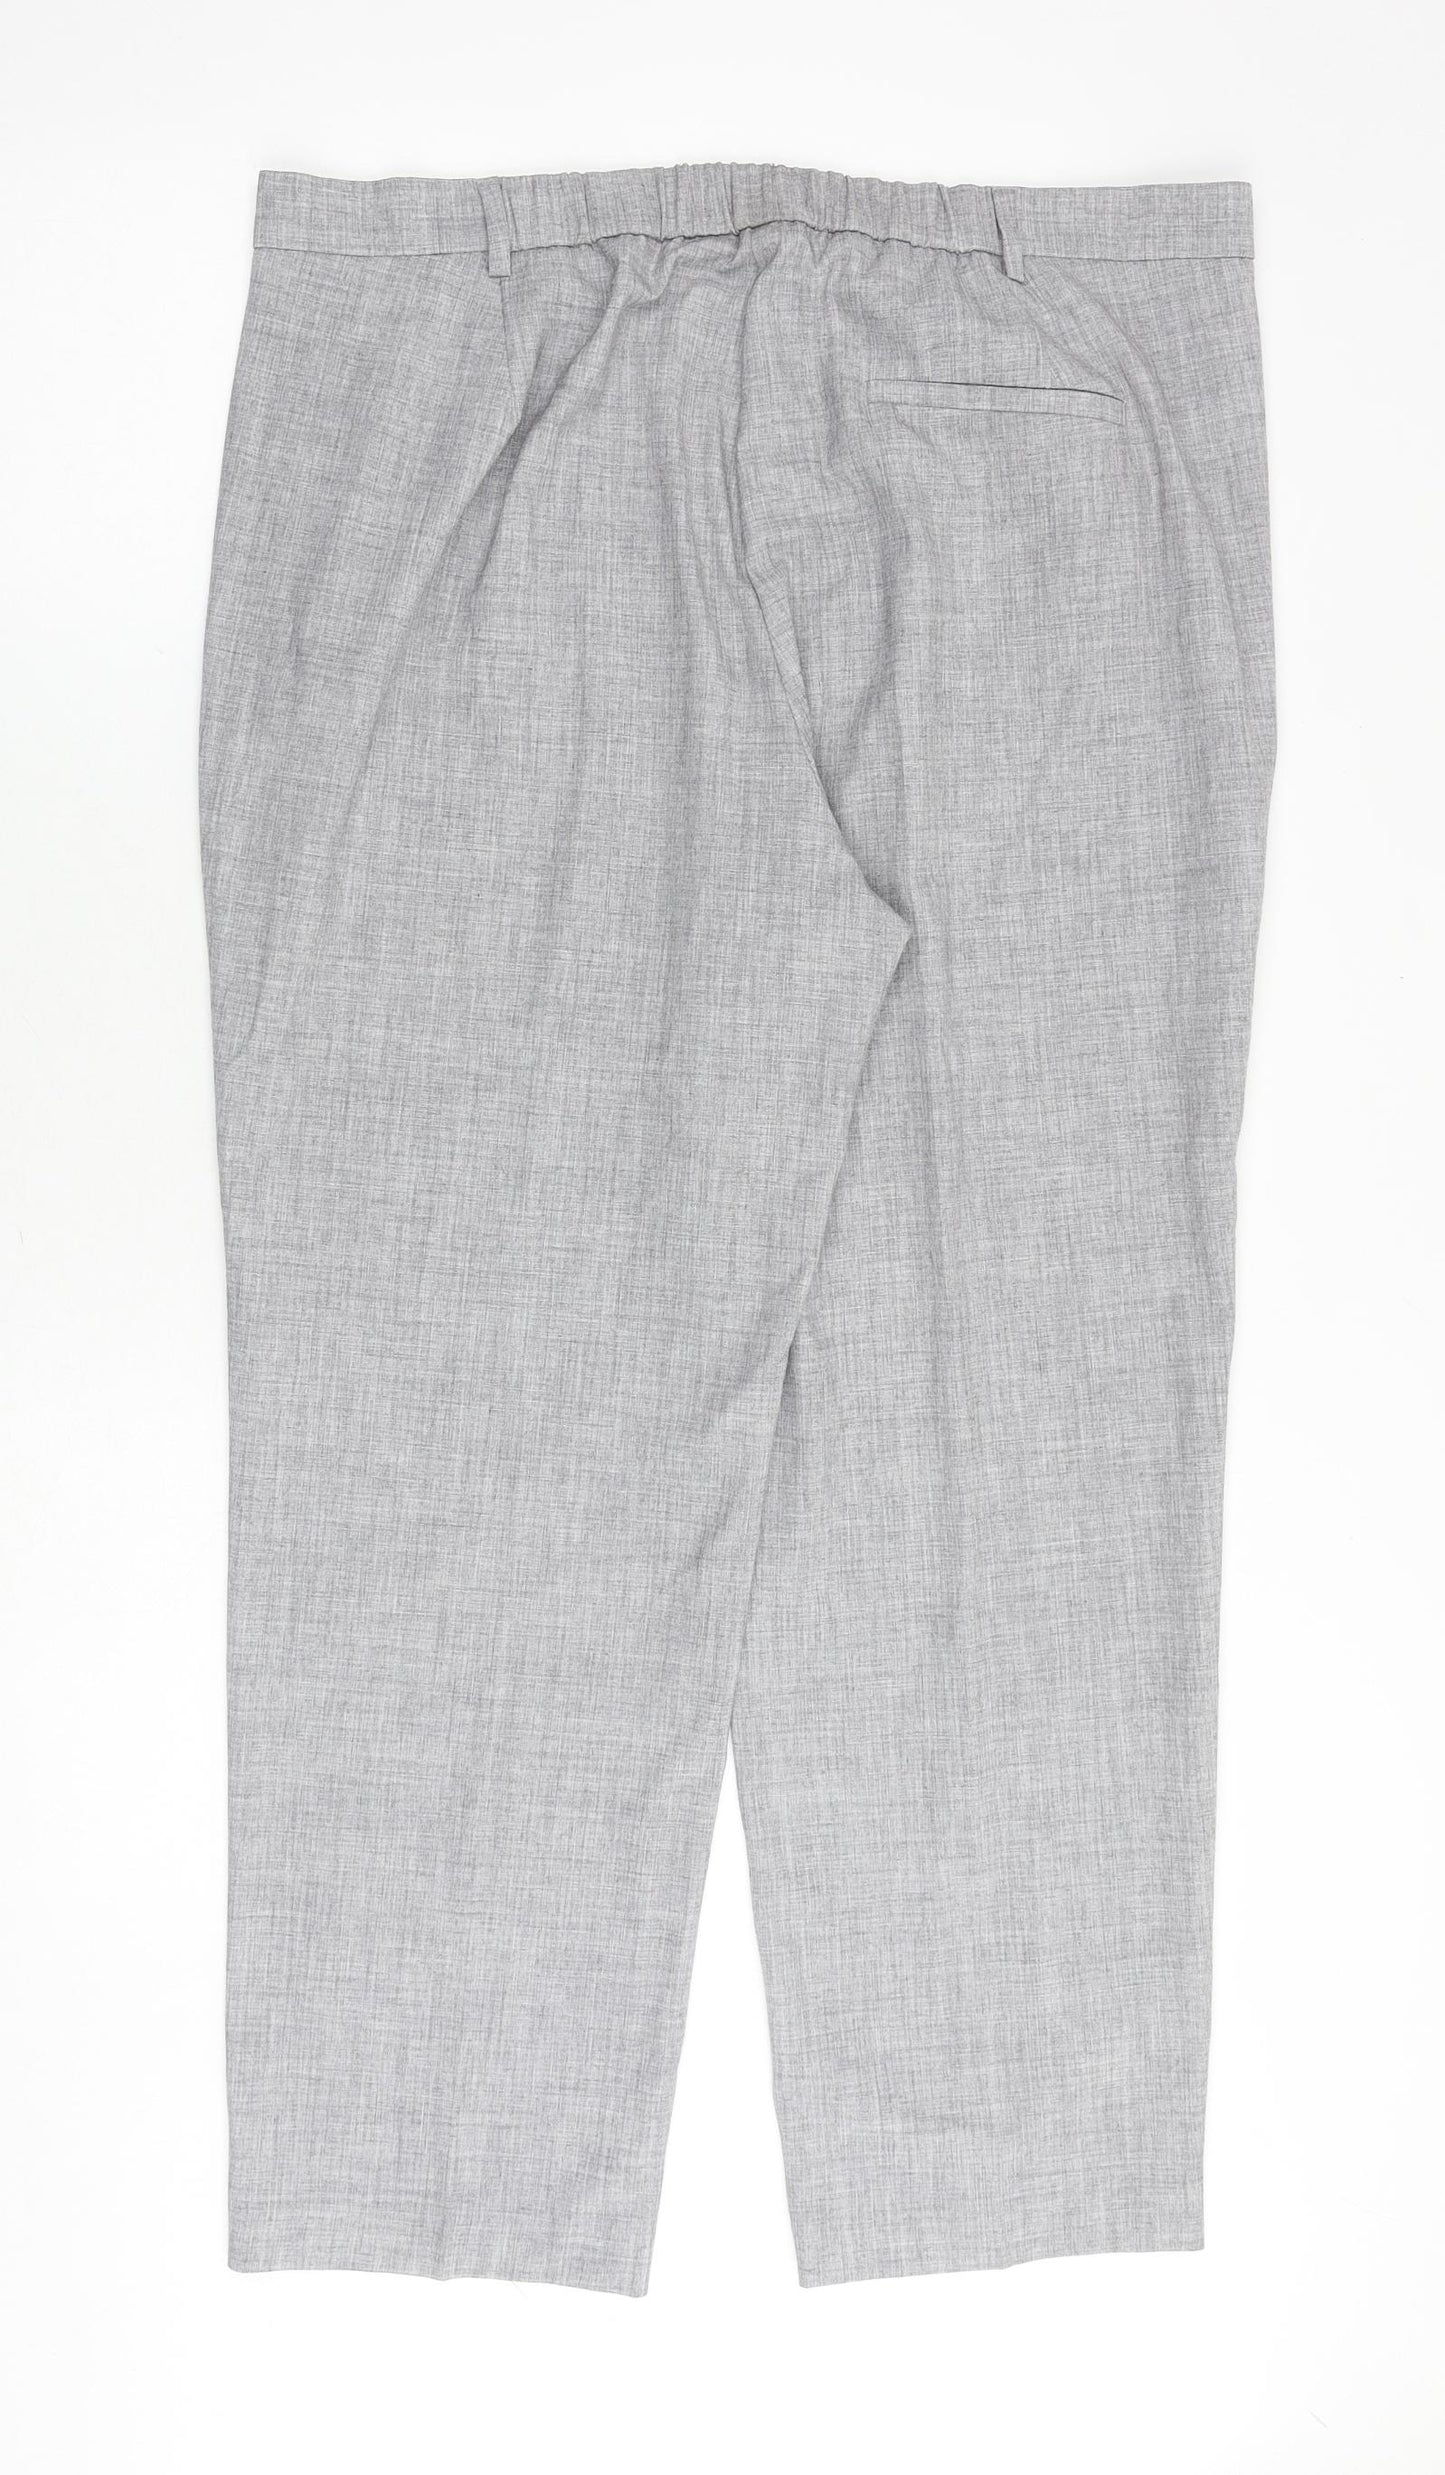 Marks and Spencer Womens Grey Polyester Trousers Size 18 Regular Zip